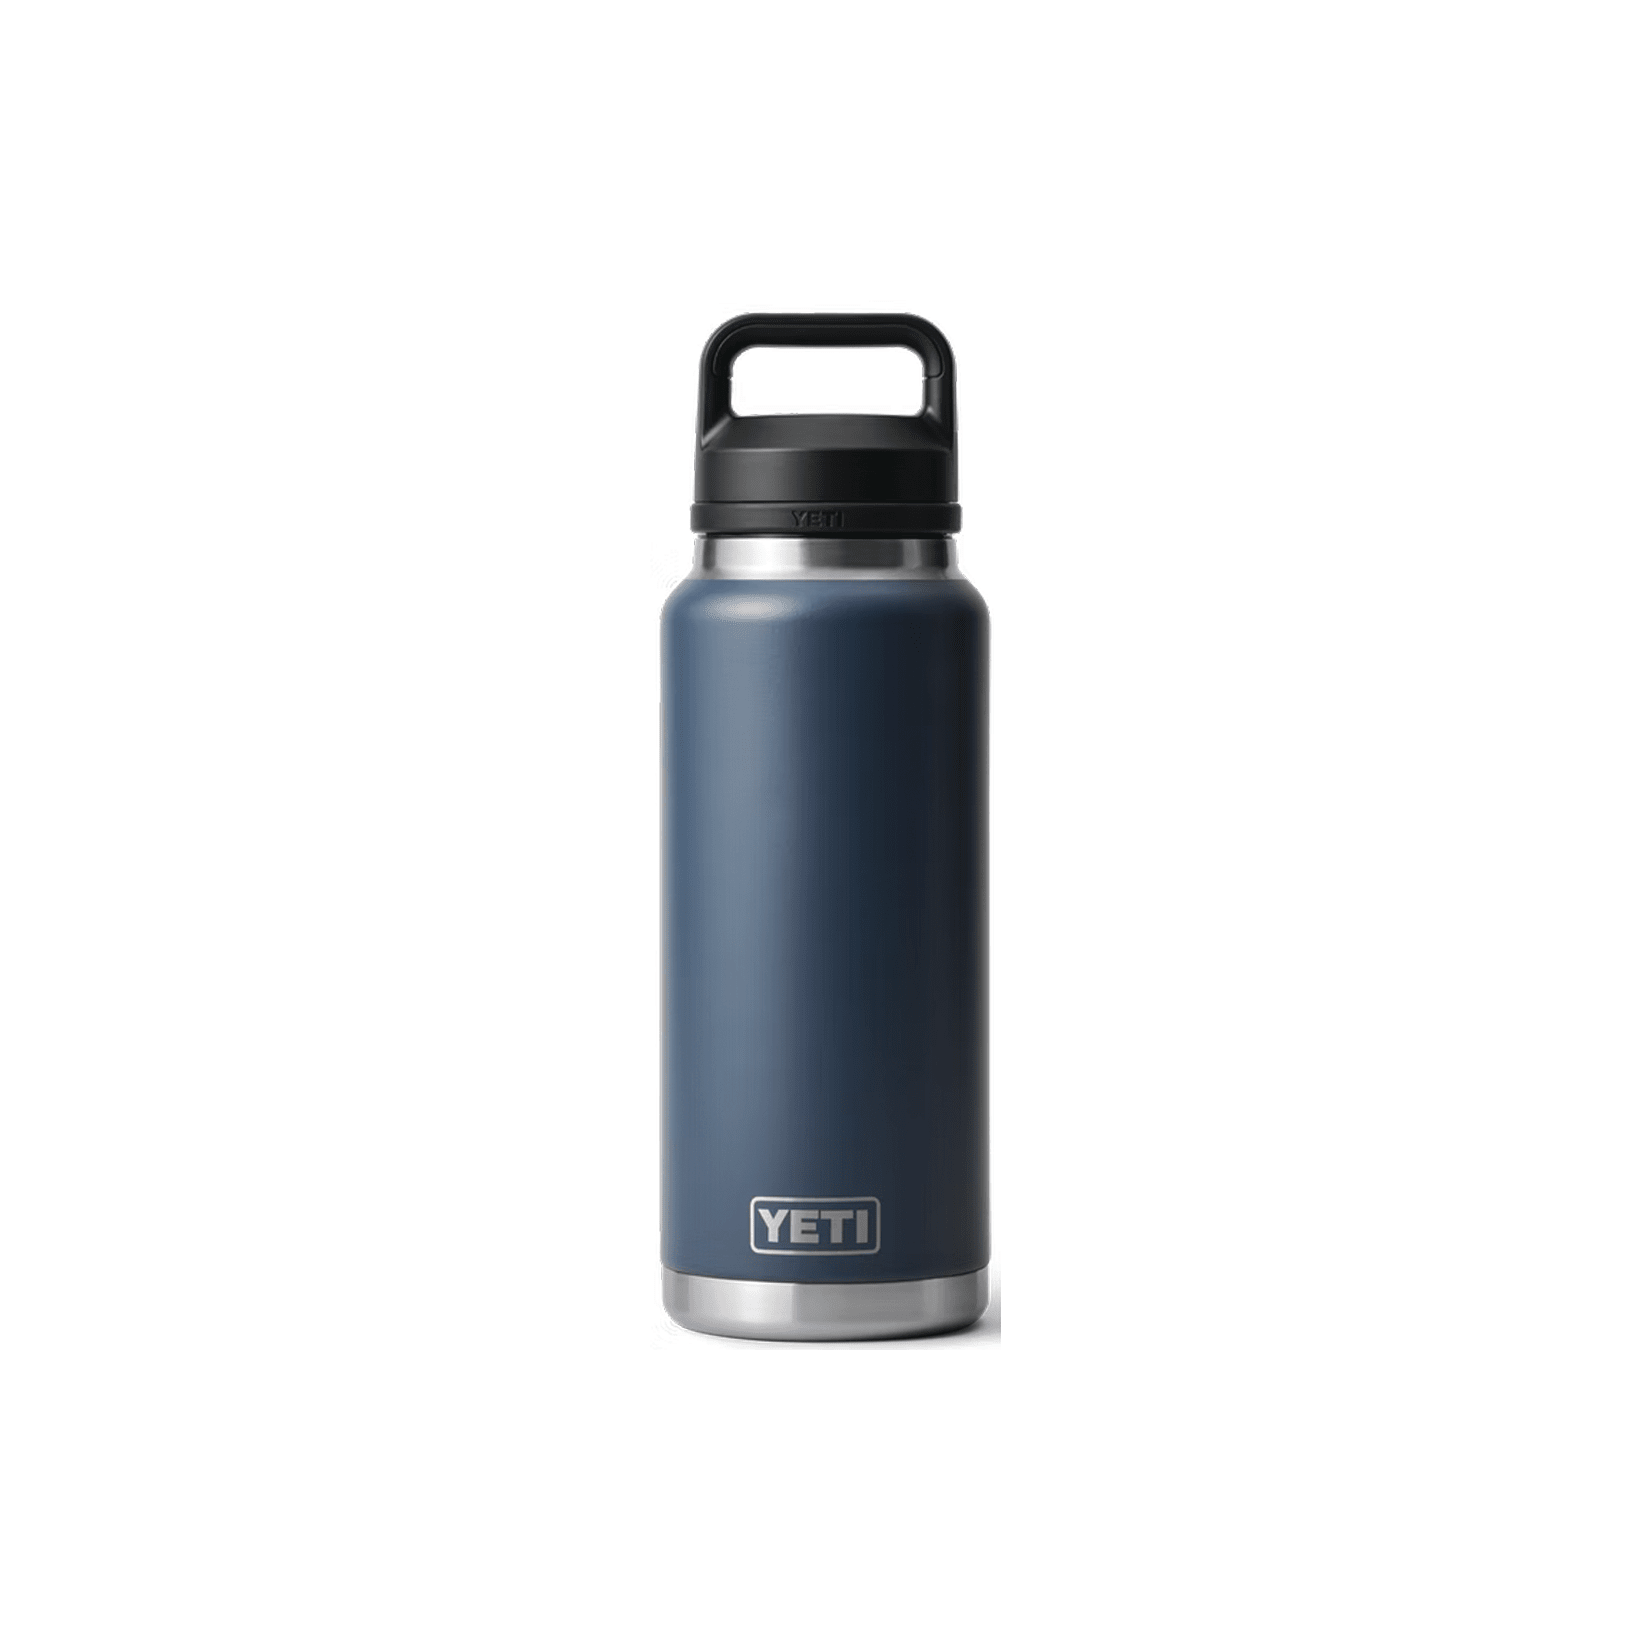  YETI Rambler 36 oz Bottle Retired Color, Vacuum Insulated,  Stainless Steel with Chug Cap, Sharptail Taupe : Sports & Outdoors